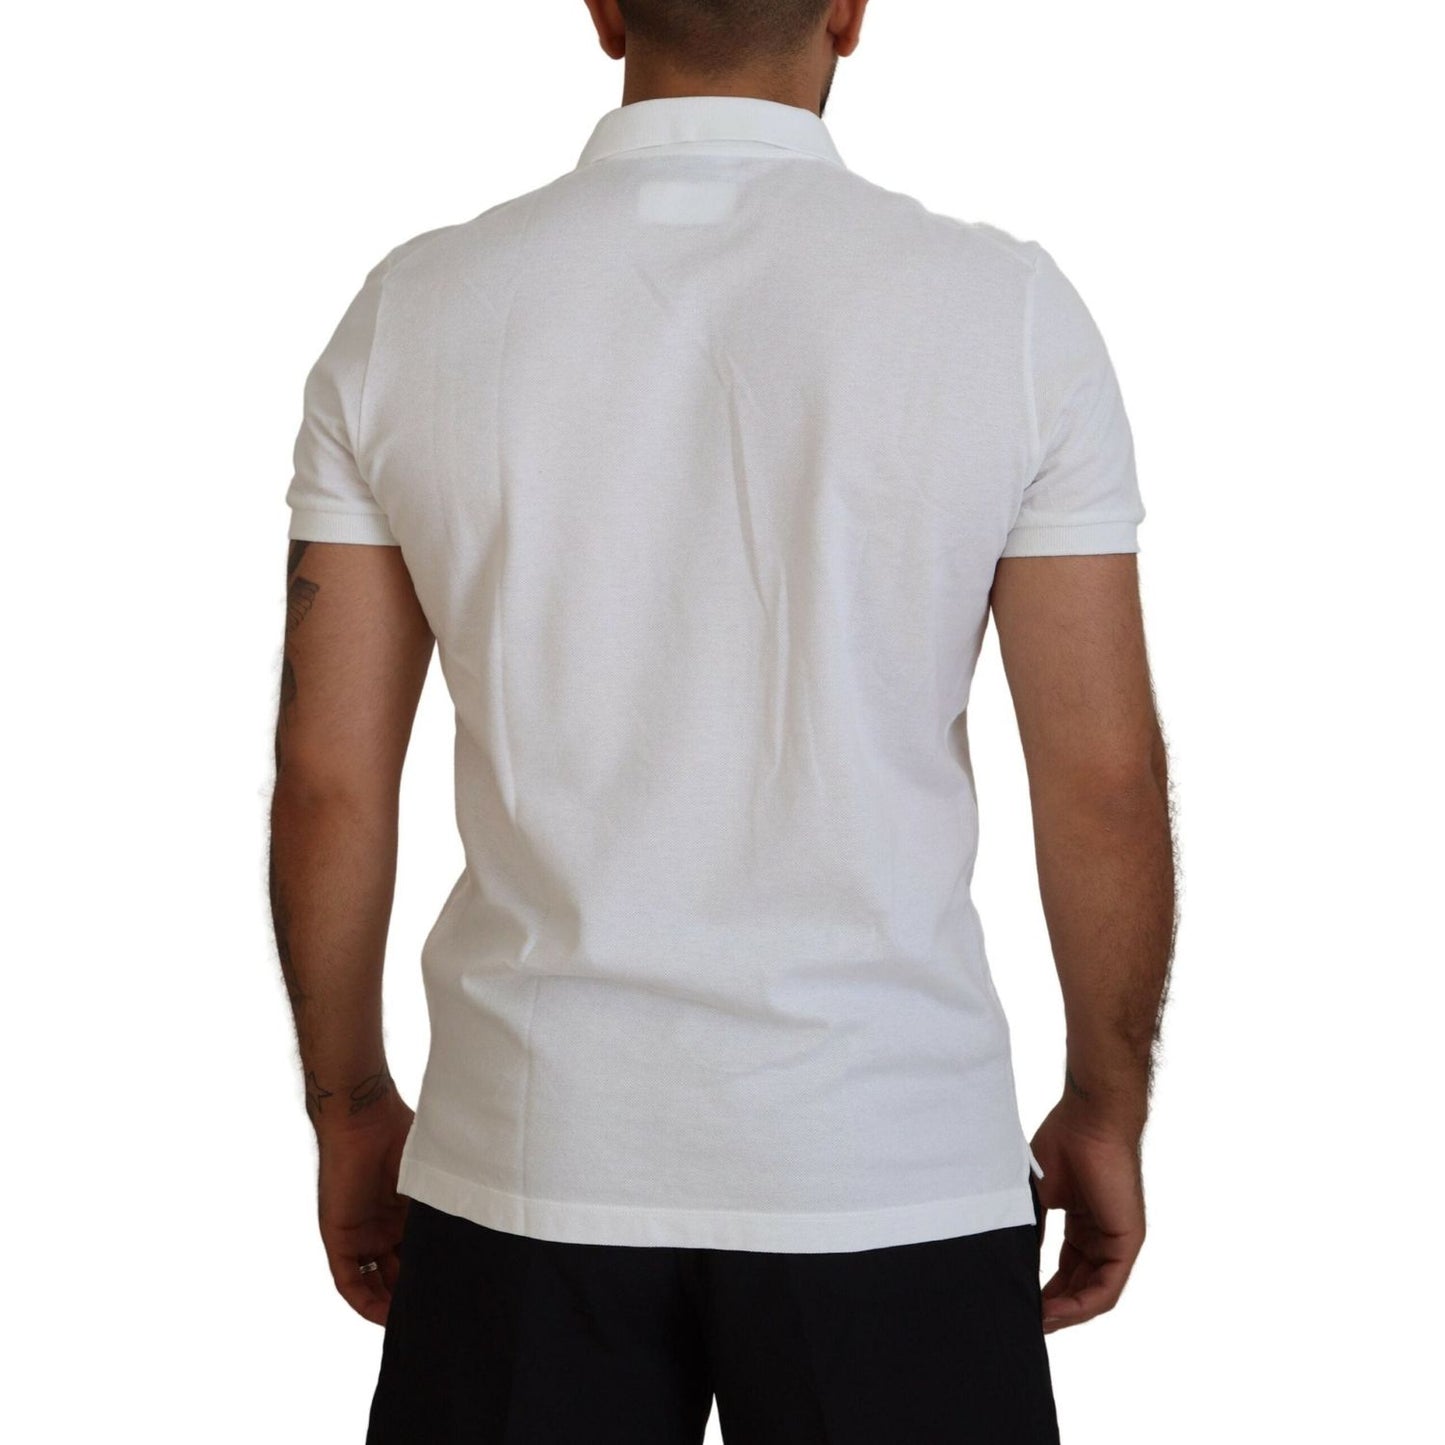 Dsquared² White Cotton Short Sleeves Collared T-shirt white-cotton-short-sleeves-collared-t-shirt